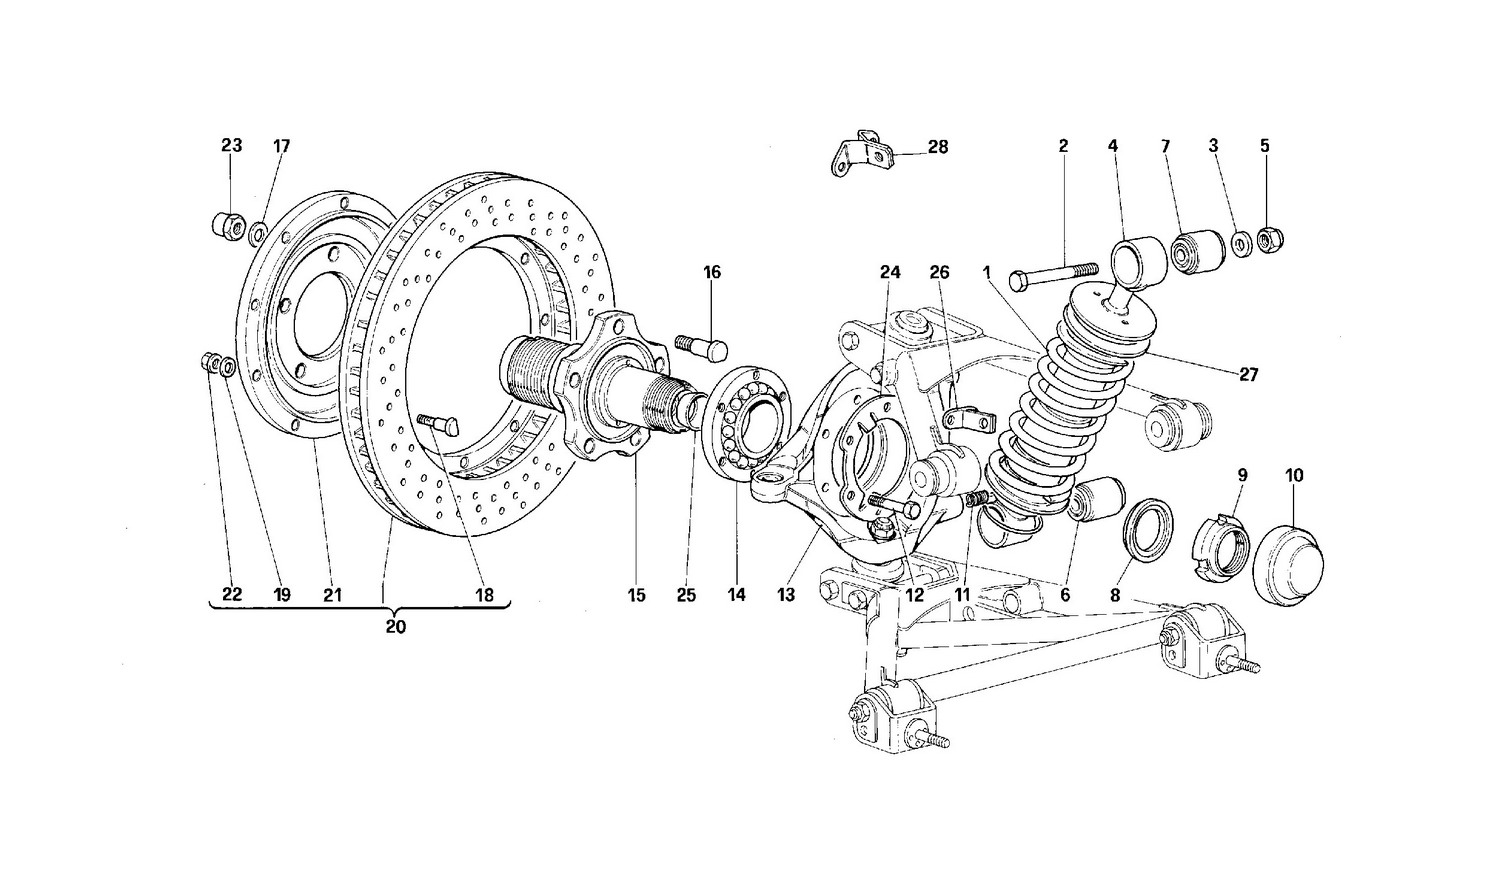 Schematic: Front Suspension - Shock Absorber And Brake Discs